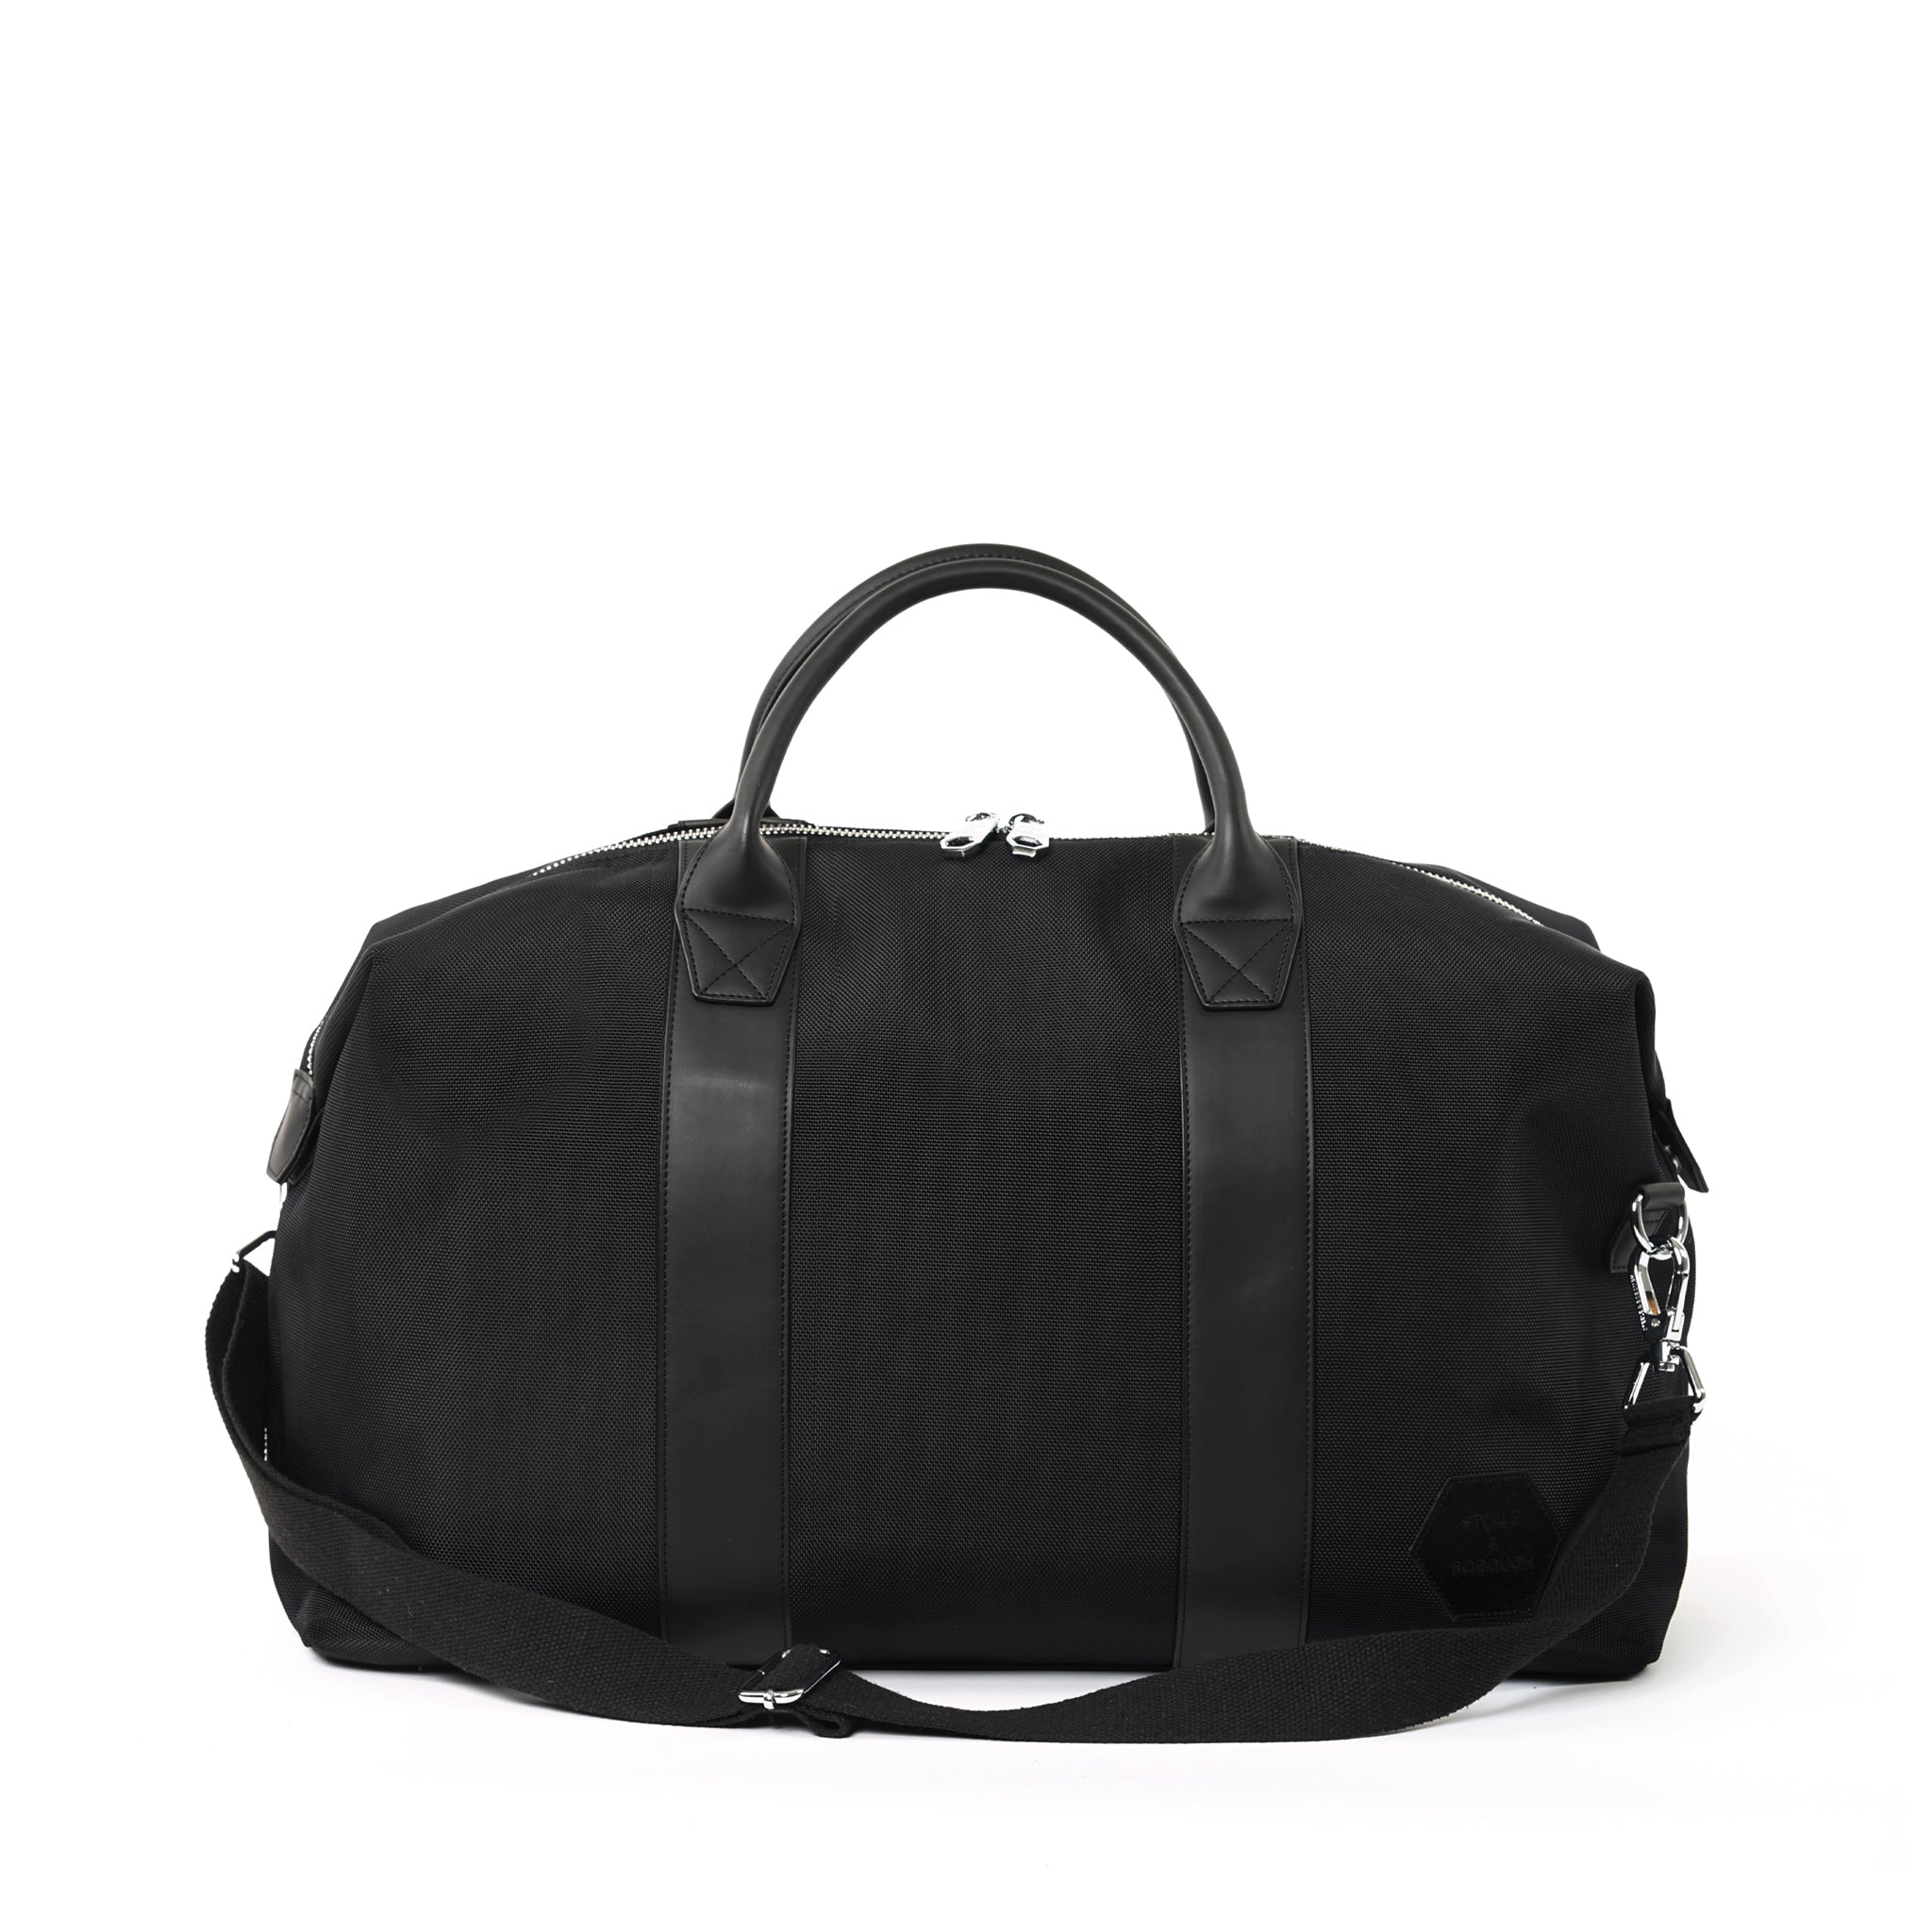 Elegant black Weekend Bag on a white background, showcasing the classic design and portability